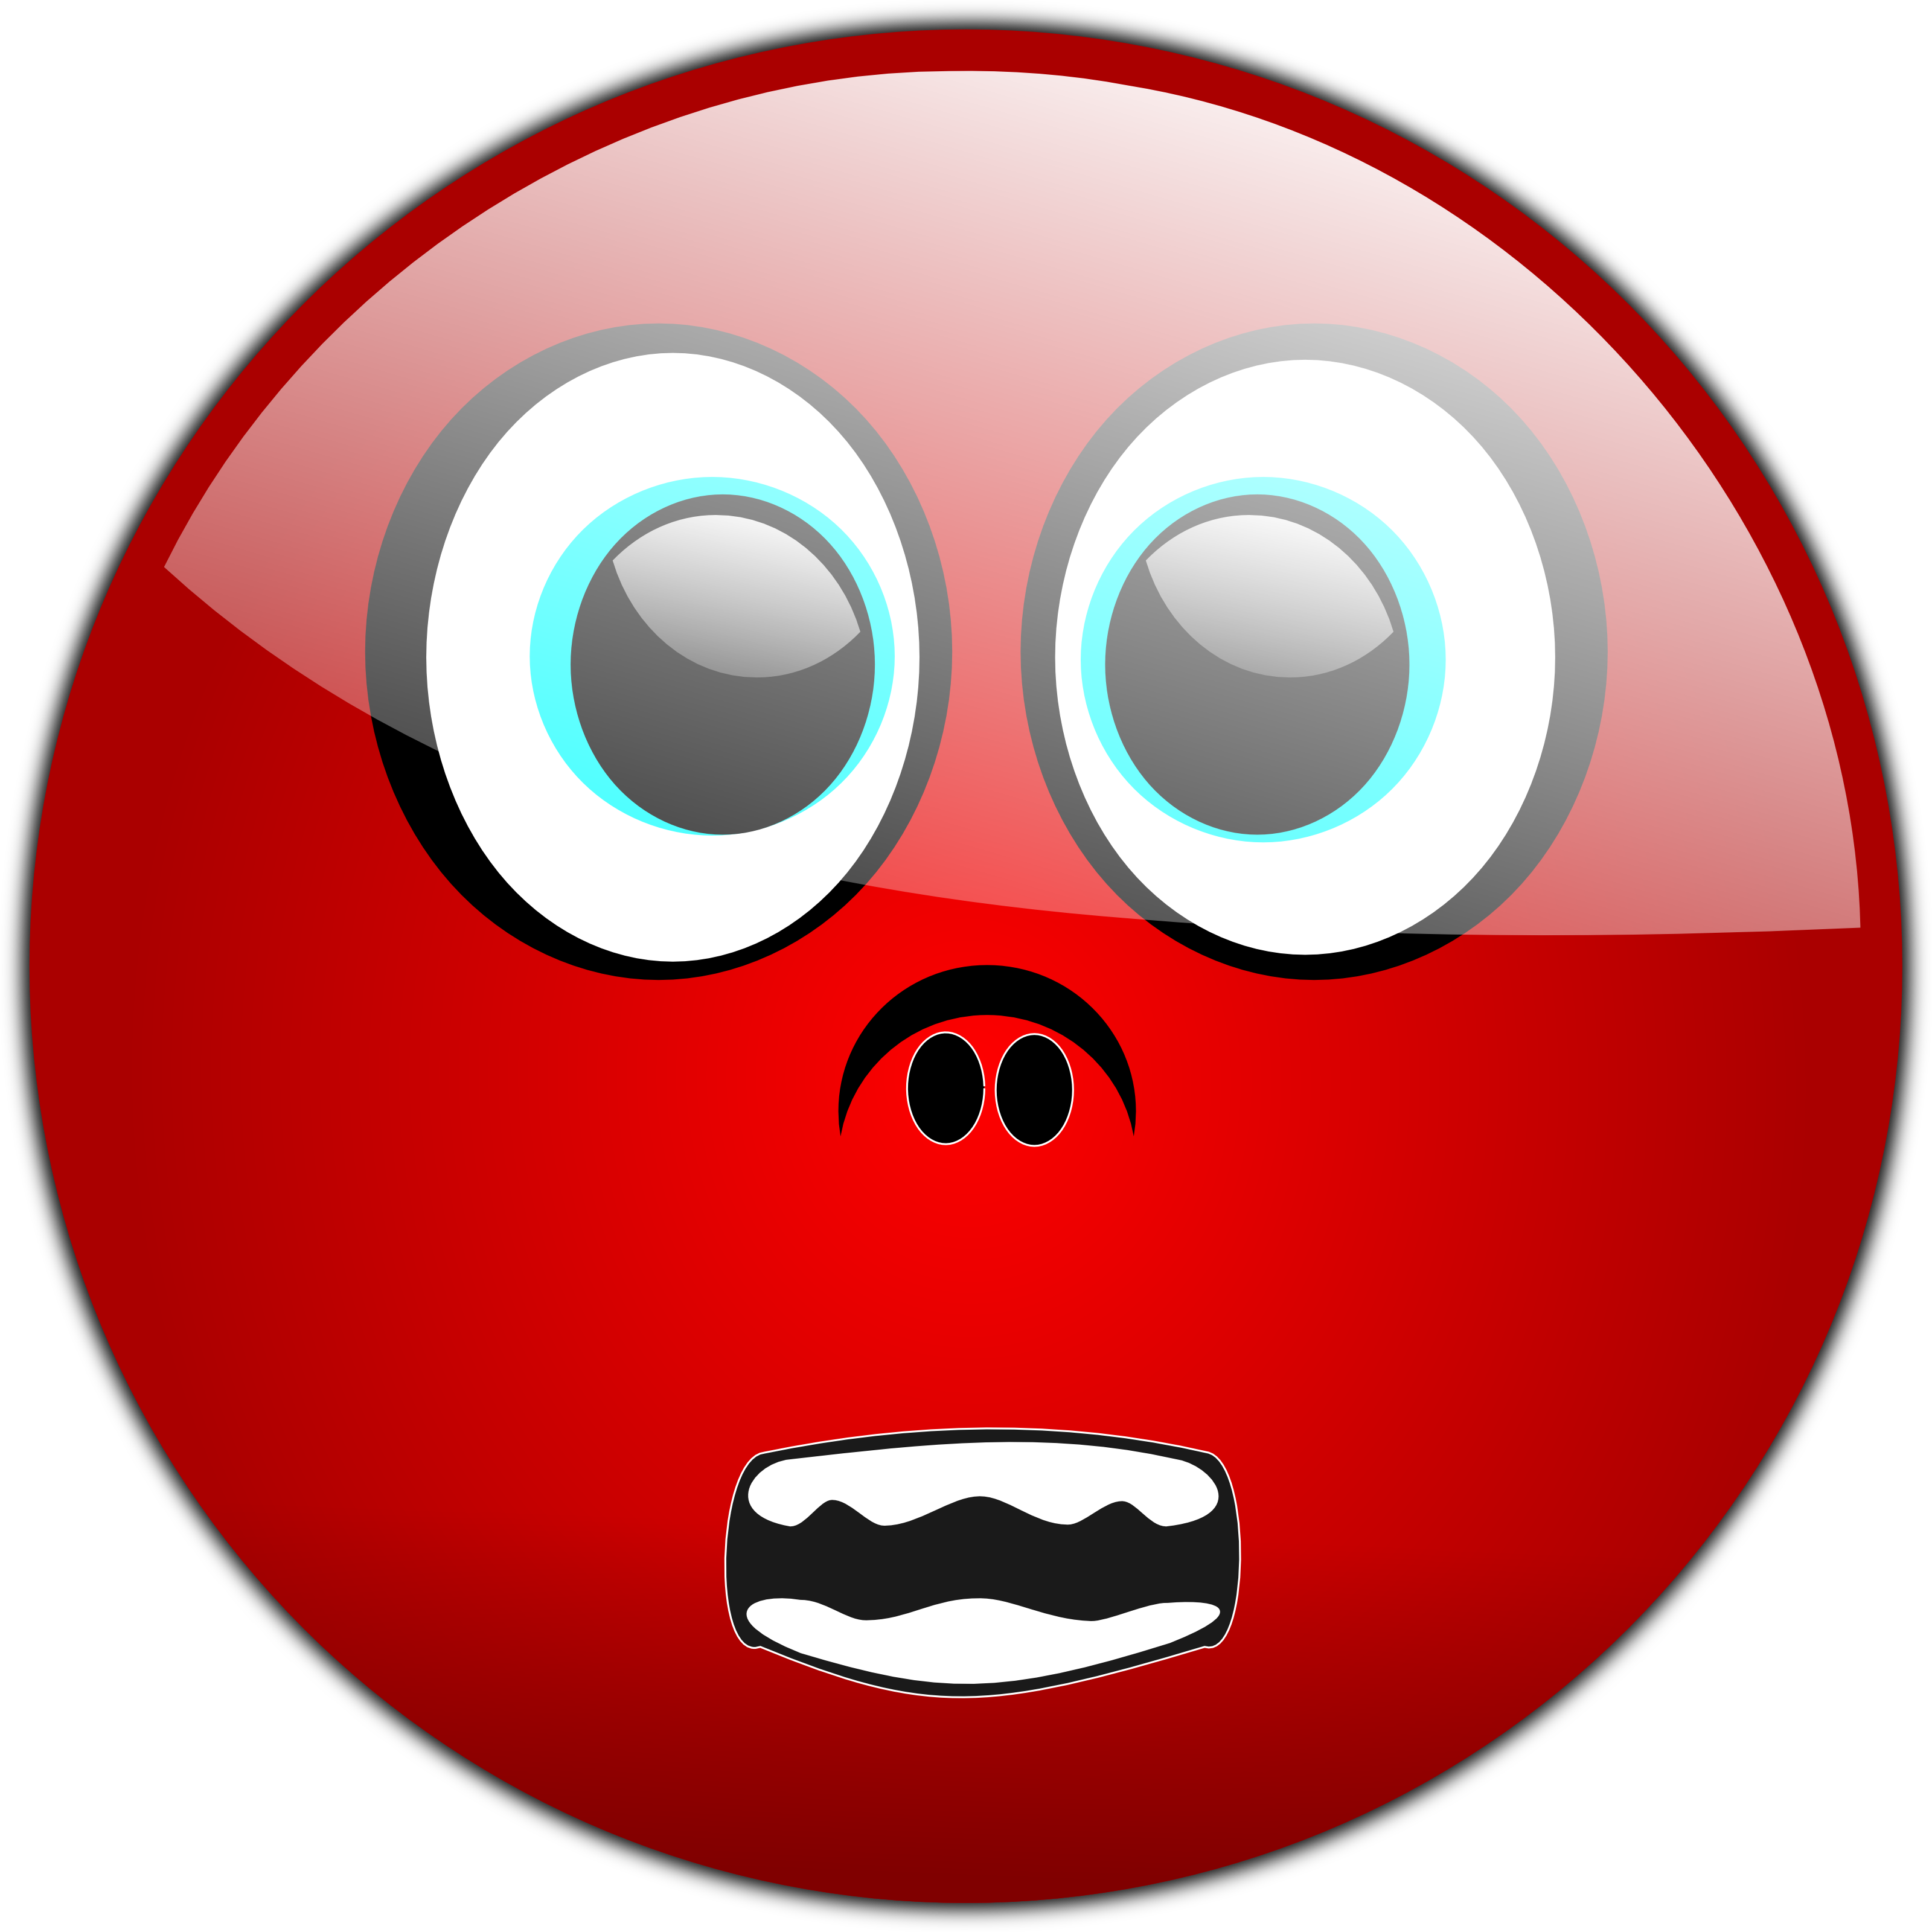 A Red Face With White Eyes And Mouth